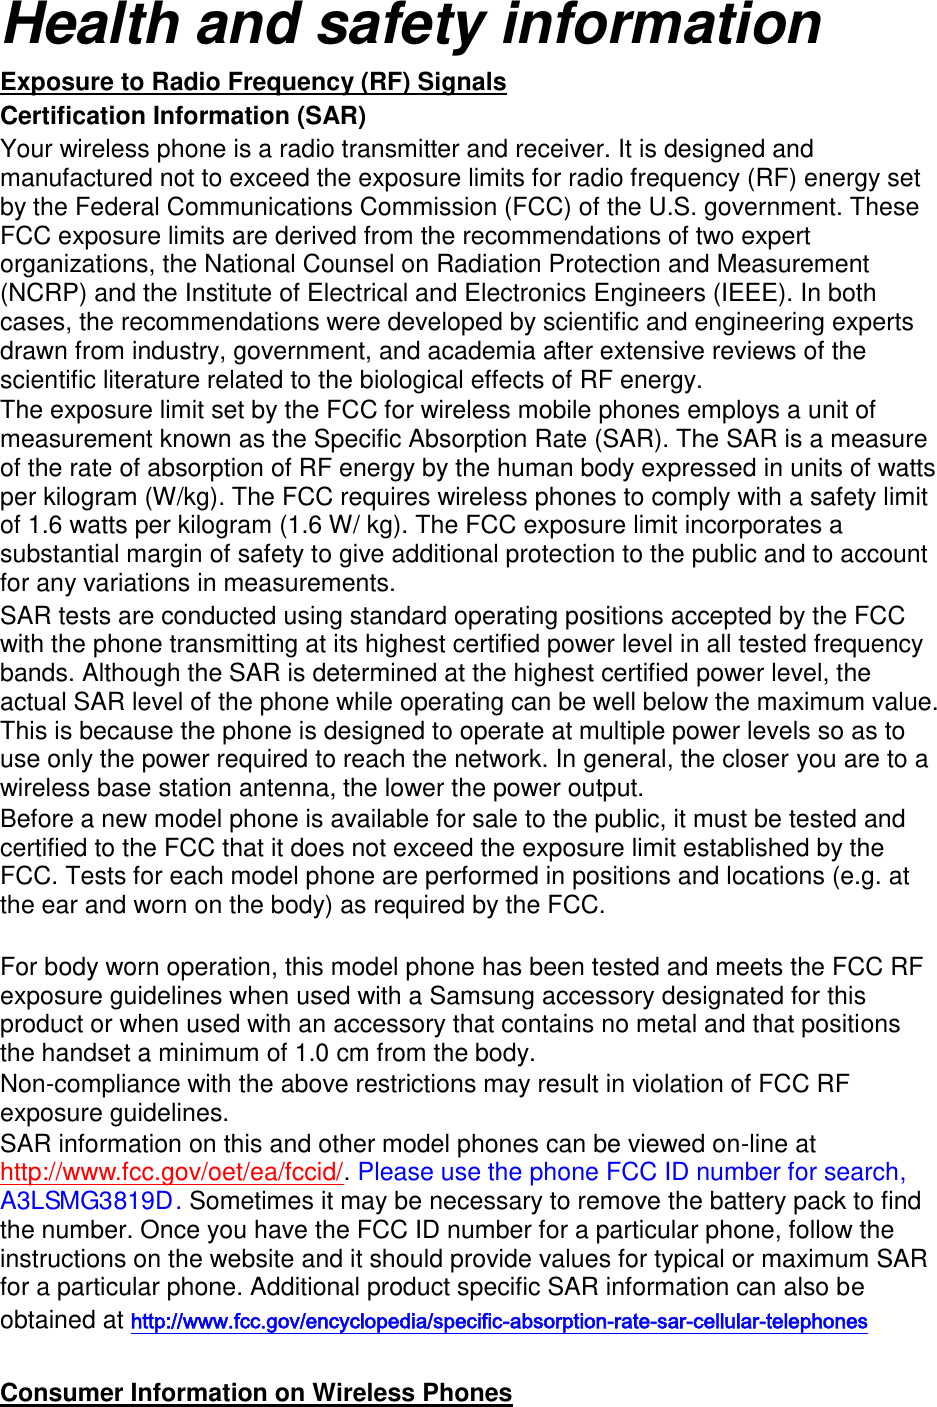 Health and safety information Exposure to Radio Frequency (RF) Signals Certification Information (SAR) Your wireless phone is a radio transmitter and receiver. It is designed and manufactured not to exceed the exposure limits for radio frequency (RF) energy set by the Federal Communications Commission (FCC) of the U.S. government. These FCC exposure limits are derived from the recommendations of two expert organizations, the National Counsel on Radiation Protection and Measurement (NCRP) and the Institute of Electrical and Electronics Engineers (IEEE). In both cases, the recommendations were developed by scientific and engineering experts drawn from industry, government, and academia after extensive reviews of the scientific literature related to the biological effects of RF energy. The exposure limit set by the FCC for wireless mobile phones employs a unit of measurement known as the Specific Absorption Rate (SAR). The SAR is a measure of the rate of absorption of RF energy by the human body expressed in units of watts per kilogram (W/kg). The FCC requires wireless phones to comply with a safety limit of 1.6 watts per kilogram (1.6 W/ kg). The FCC exposure limit incorporates a substantial margin of safety to give additional protection to the public and to account for any variations in measurements. SAR tests are conducted using standard operating positions accepted by the FCC with the phone transmitting at its highest certified power level in all tested frequency bands. Although the SAR is determined at the highest certified power level, the actual SAR level of the phone while operating can be well below the maximum value. This is because the phone is designed to operate at multiple power levels so as to use only the power required to reach the network. In general, the closer you are to a wireless base station antenna, the lower the power output. Before a new model phone is available for sale to the public, it must be tested and certified to the FCC that it does not exceed the exposure limit established by the FCC. Tests for each model phone are performed in positions and locations (e.g. at the ear and worn on the body) as required by the FCC.      For body worn operation, this model phone has been tested and meets the FCC RF exposure guidelines when used with a Samsung accessory designated for this product or when used with an accessory that contains no metal and that positions the handset a minimum of 1.0 cm from the body.   Non-compliance with the above restrictions may result in violation of FCC RF exposure guidelines. SAR information on this and other model phones can be viewed on-line at http://www.fcc.gov/oet/ea/fccid/. Please use the phone FCC ID number for search, A3LSMG3819D.  Sometimes it may be necessary to remove the battery pack to find the number. Once you have the FCC ID number for a particular phone, follow the instructions on the website and it should provide values for typical or maximum SAR for a particular phone. Additional product specific SAR information can also be obtained at http://www.fcc.gov/encyclopedia/specific-absorption-rate-sar-cellular-telephones  Consumer Information on Wireless Phones 